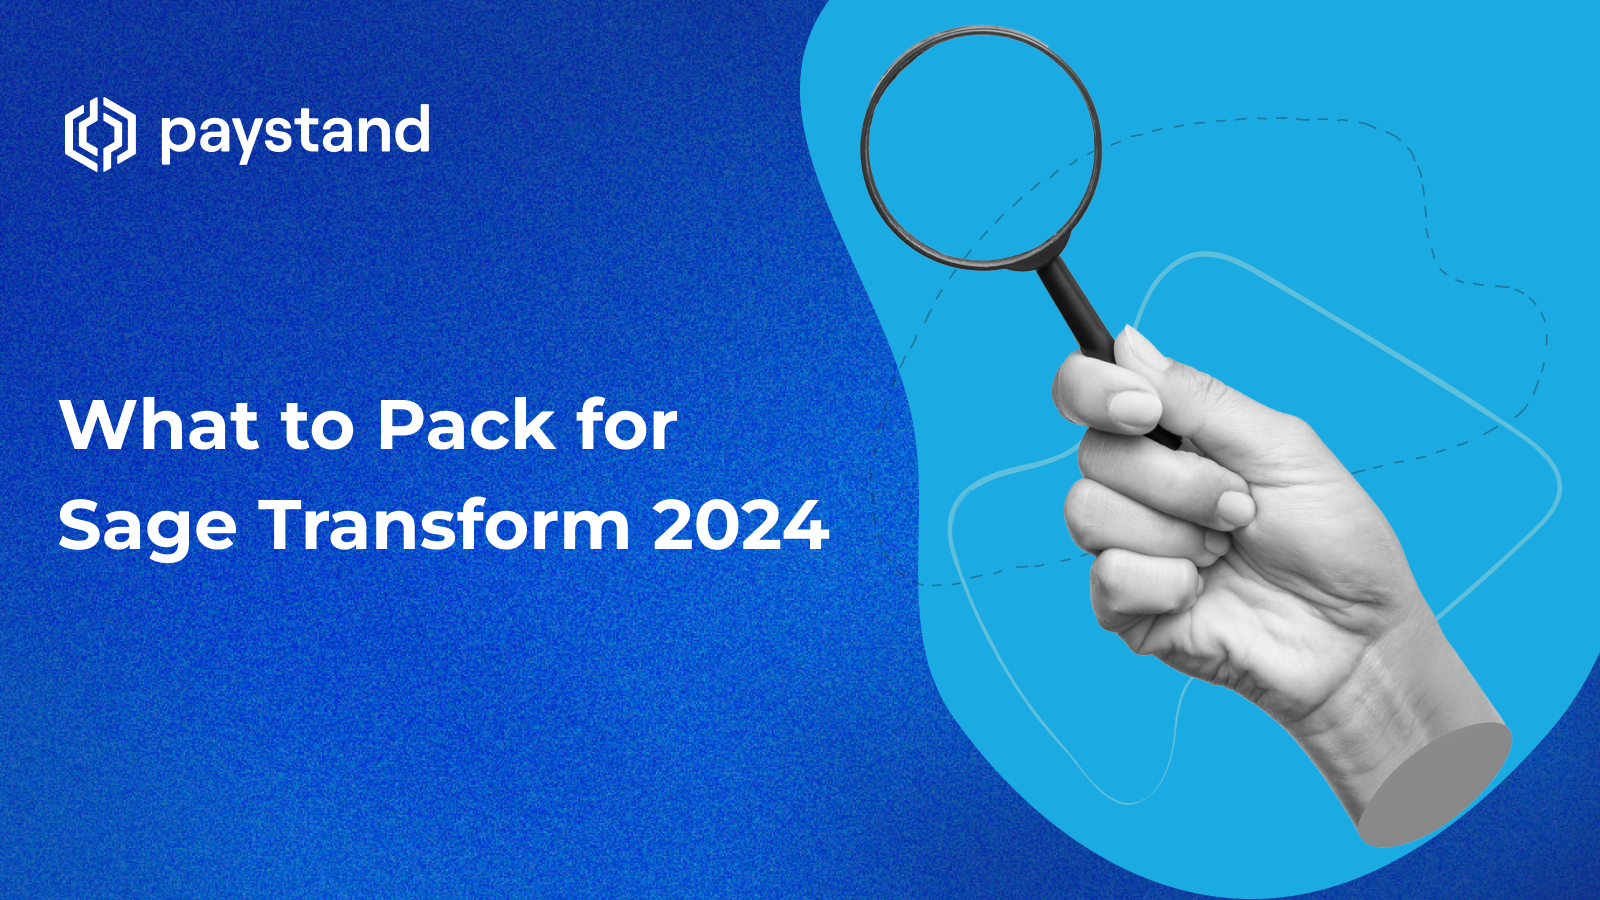 What to Pack for Sage Transform 2024